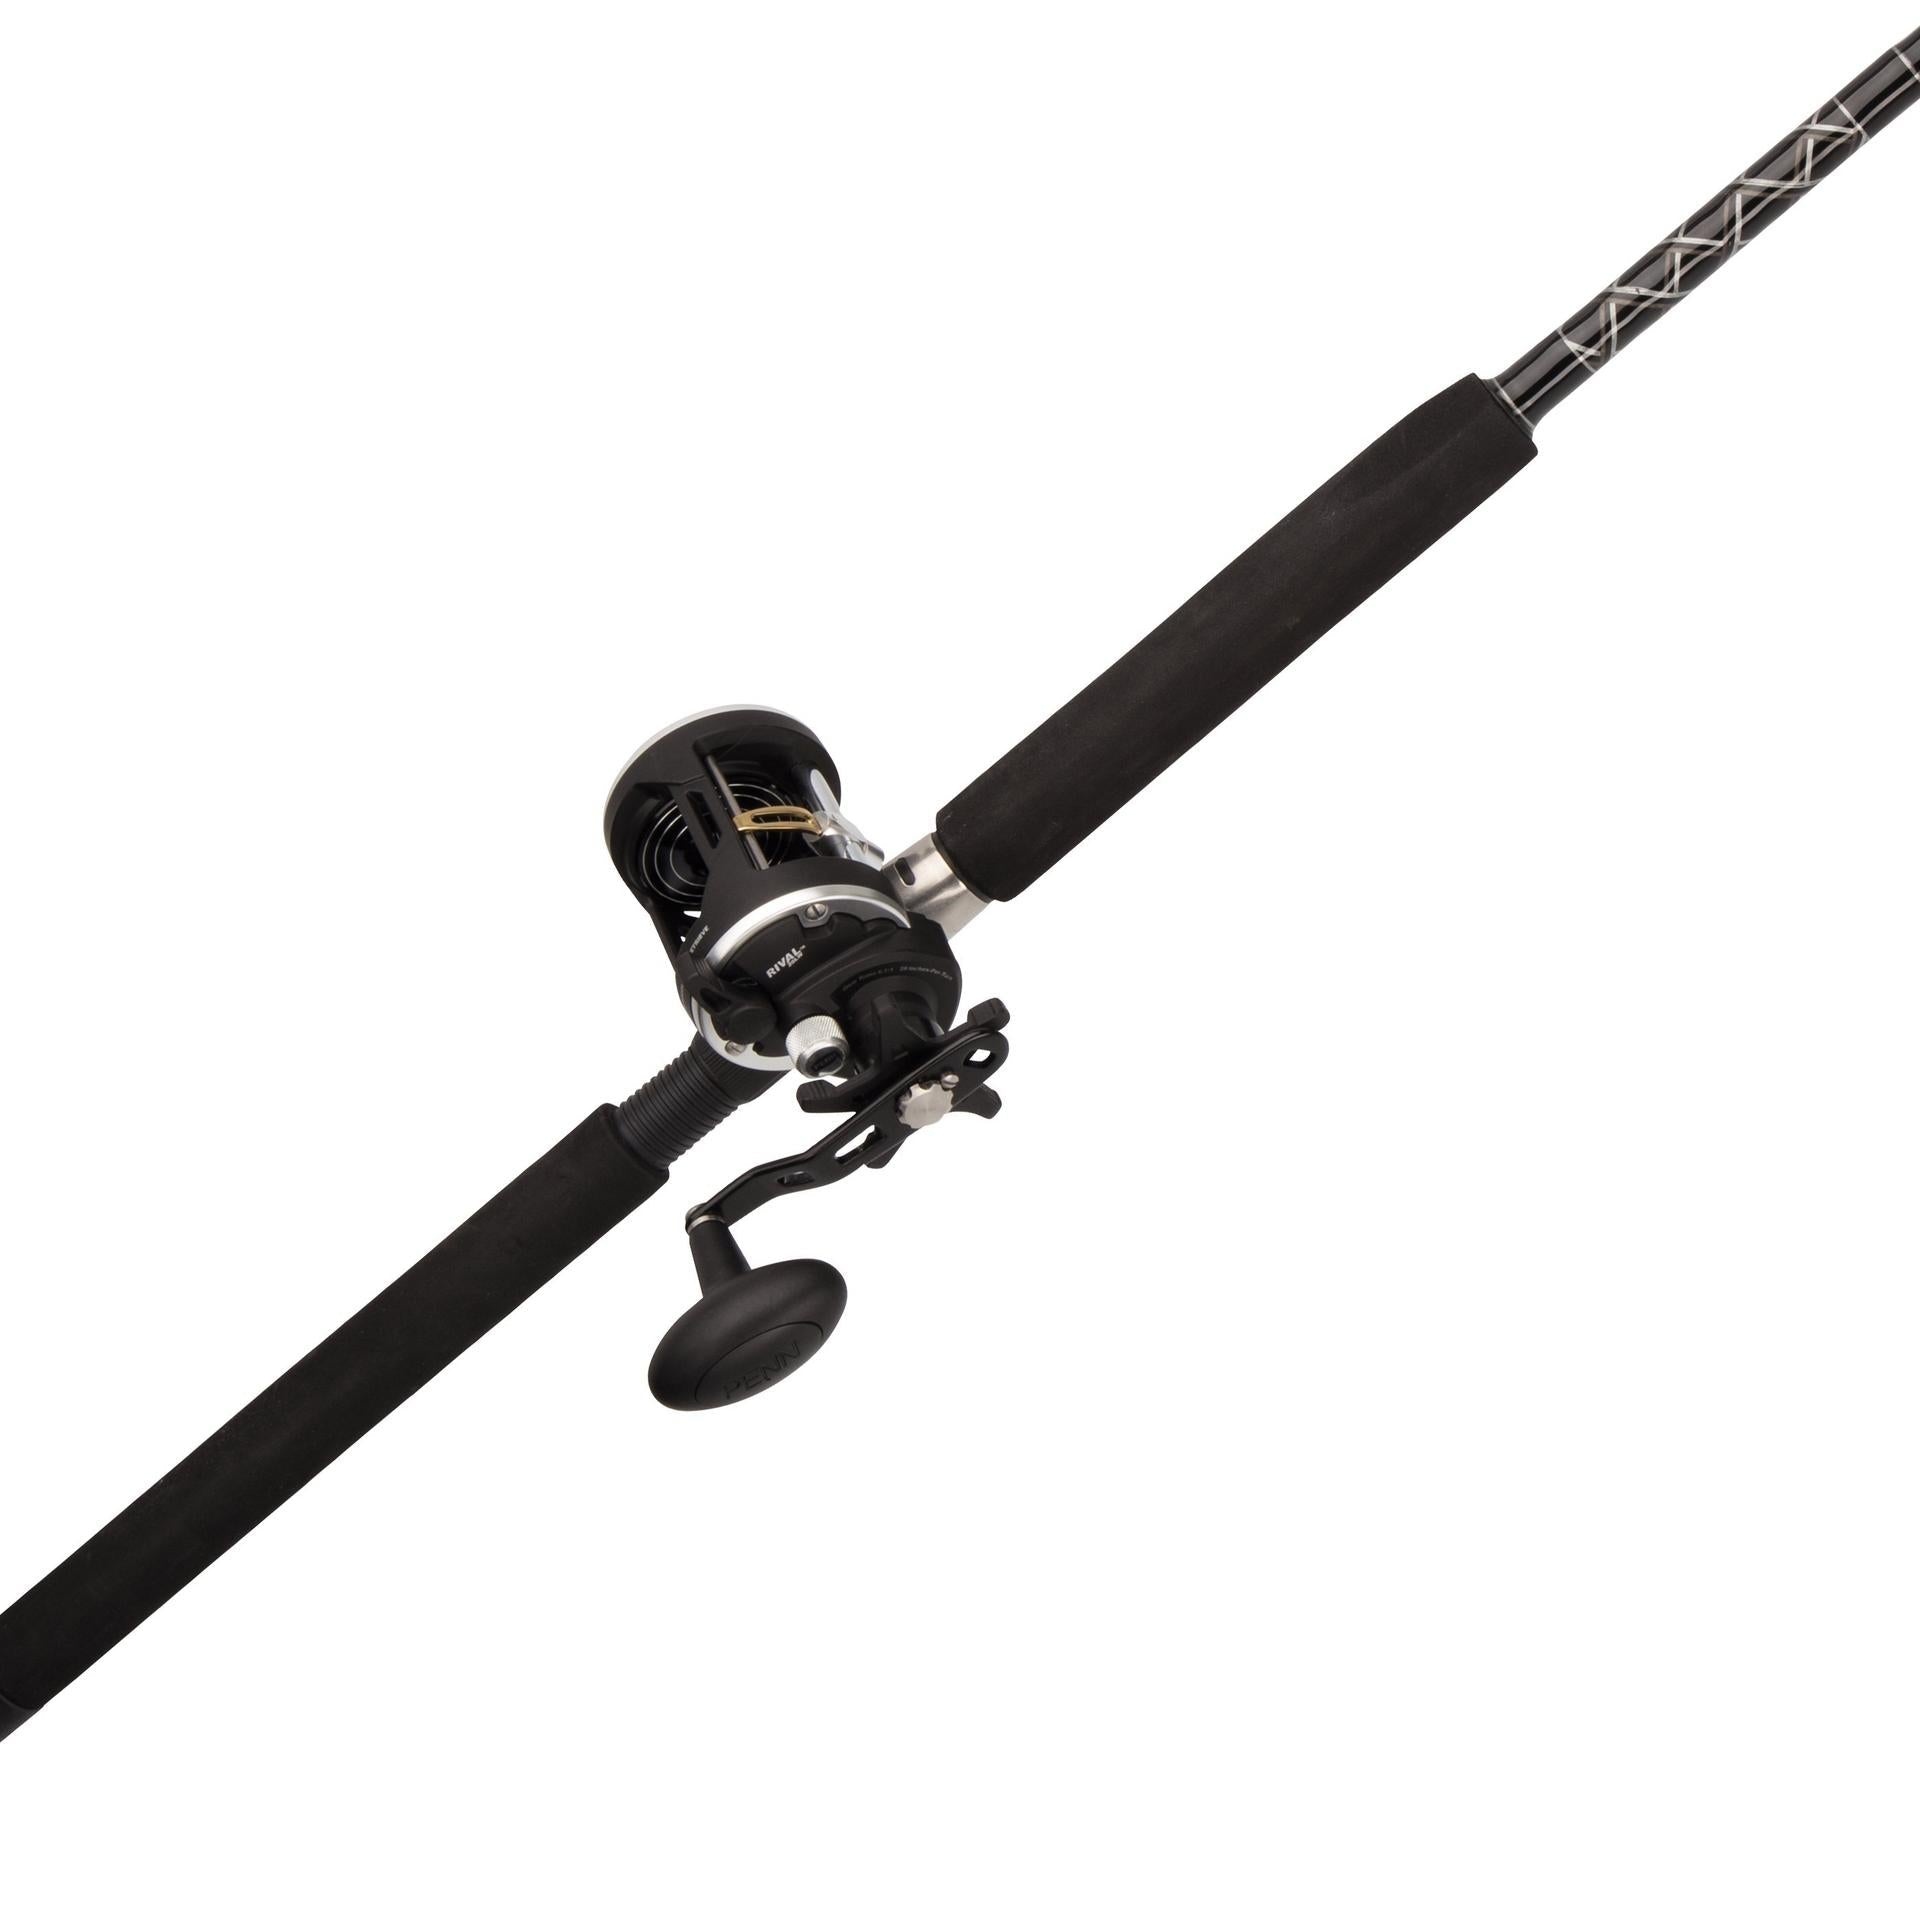 Unisex Fishing Rod & Reel Combos by Brand in Rod & Reel Combos 